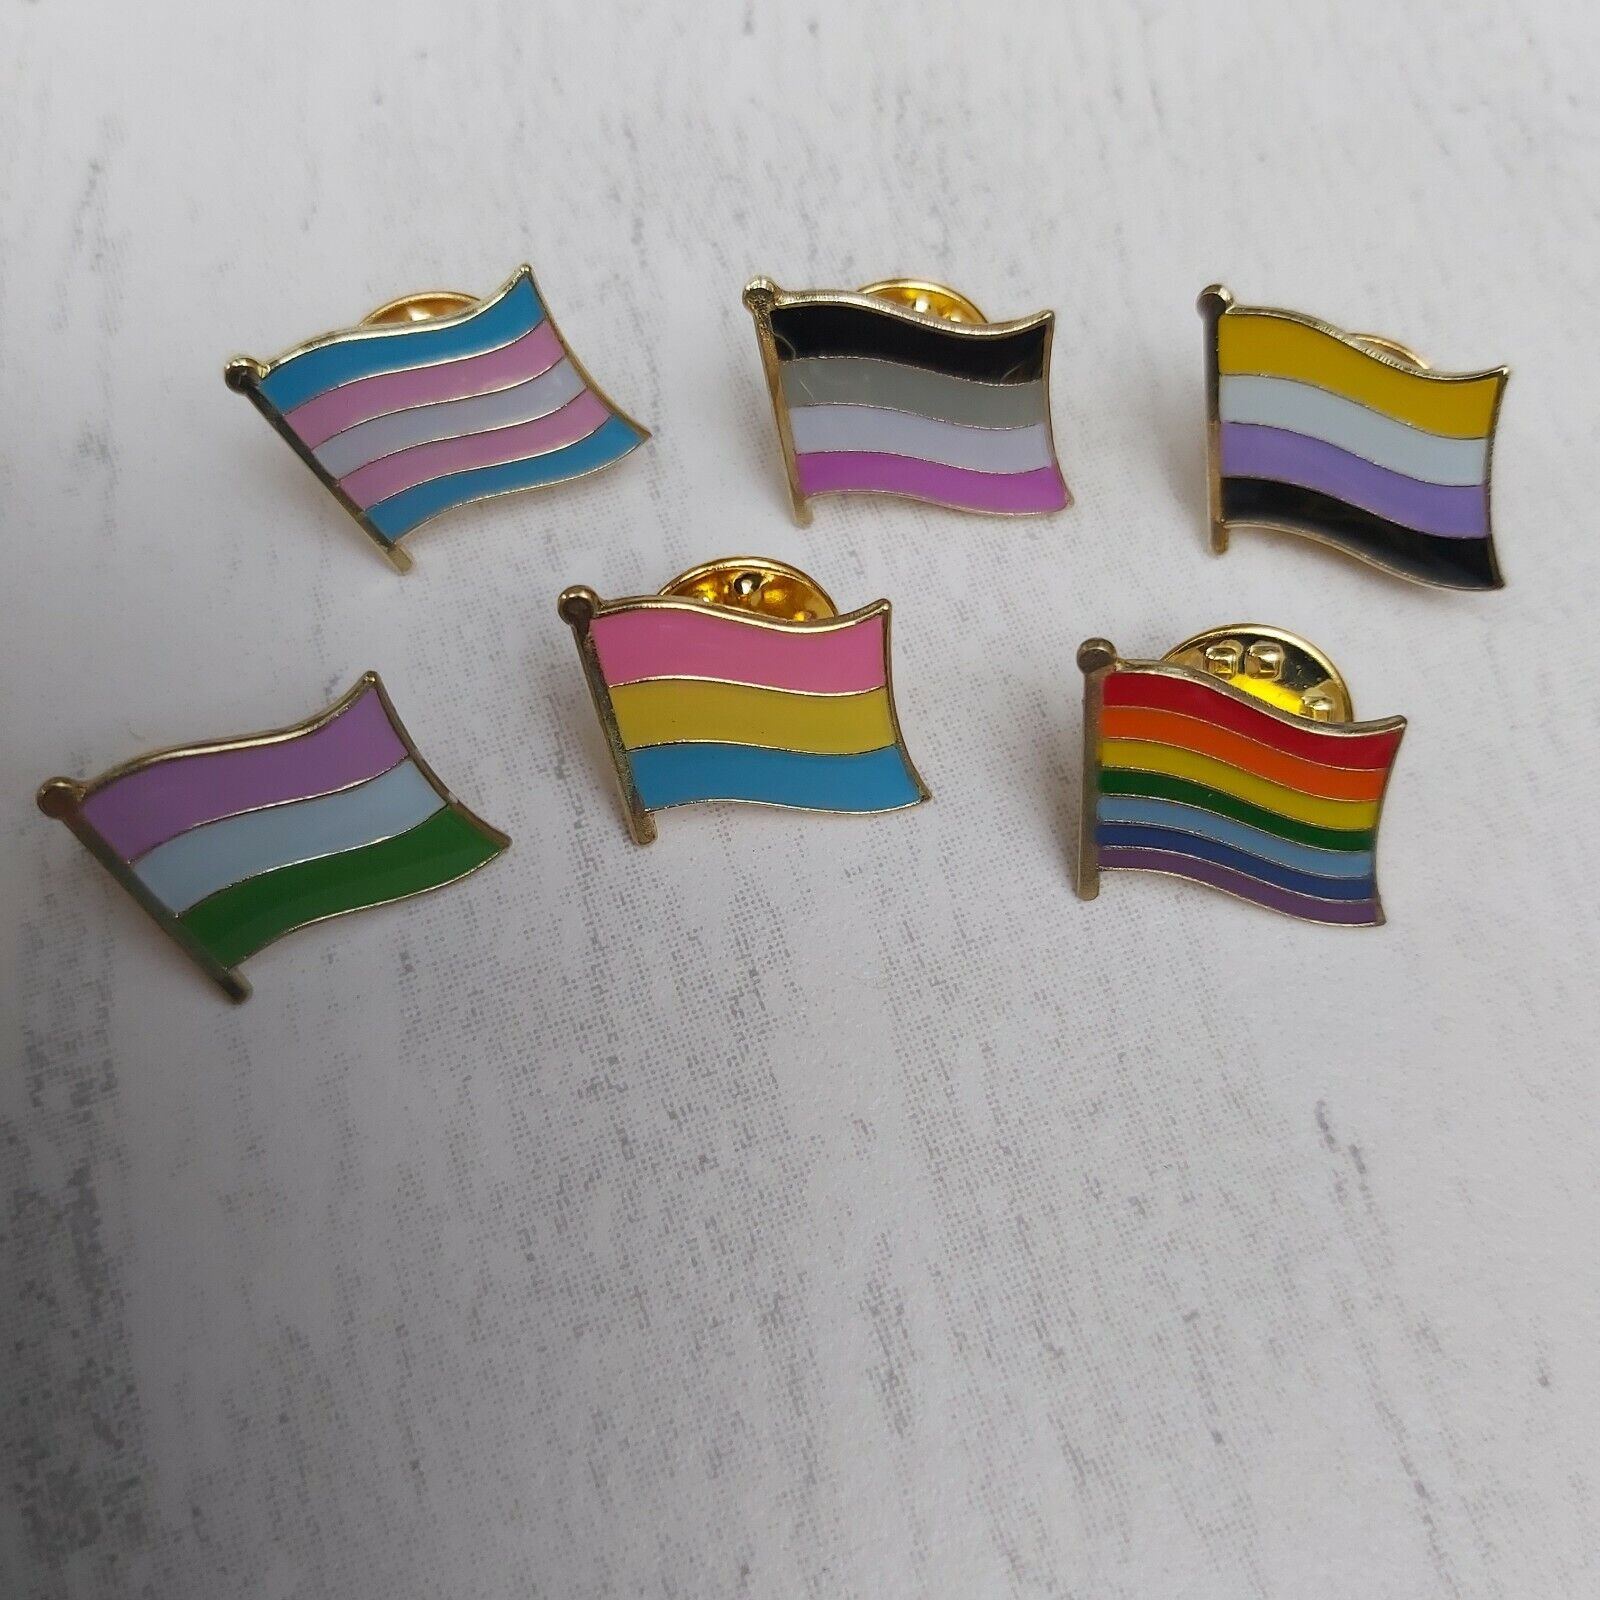 LGBTQ+ FLAG PIN BADGE Pride Asexual Transgender NonBinary Pansexual FREE POSTAGE